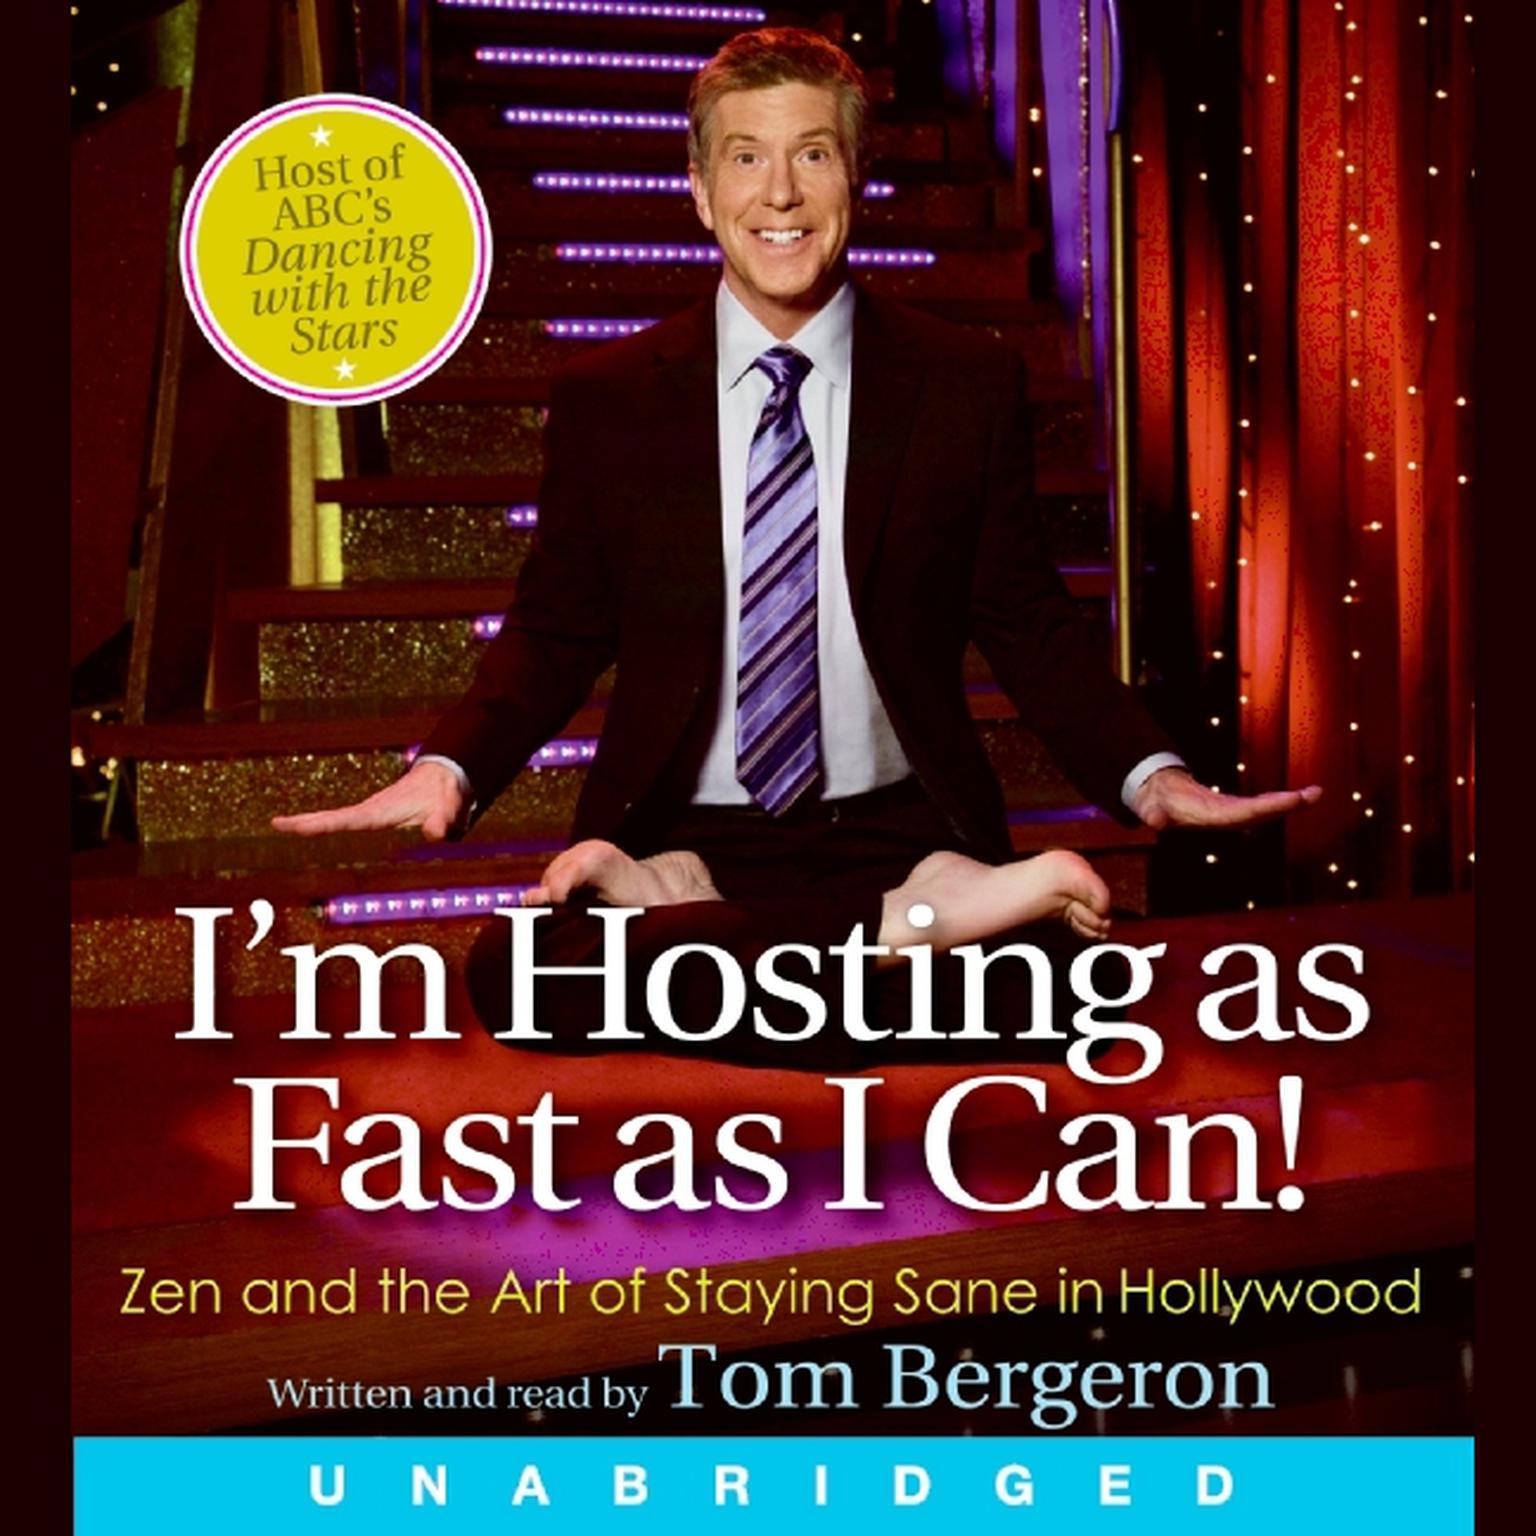 Im Hosting as Fast as I Can!: Zen and the Art of Staying Sane in Hollywood Audiobook, by Tom Bergeron